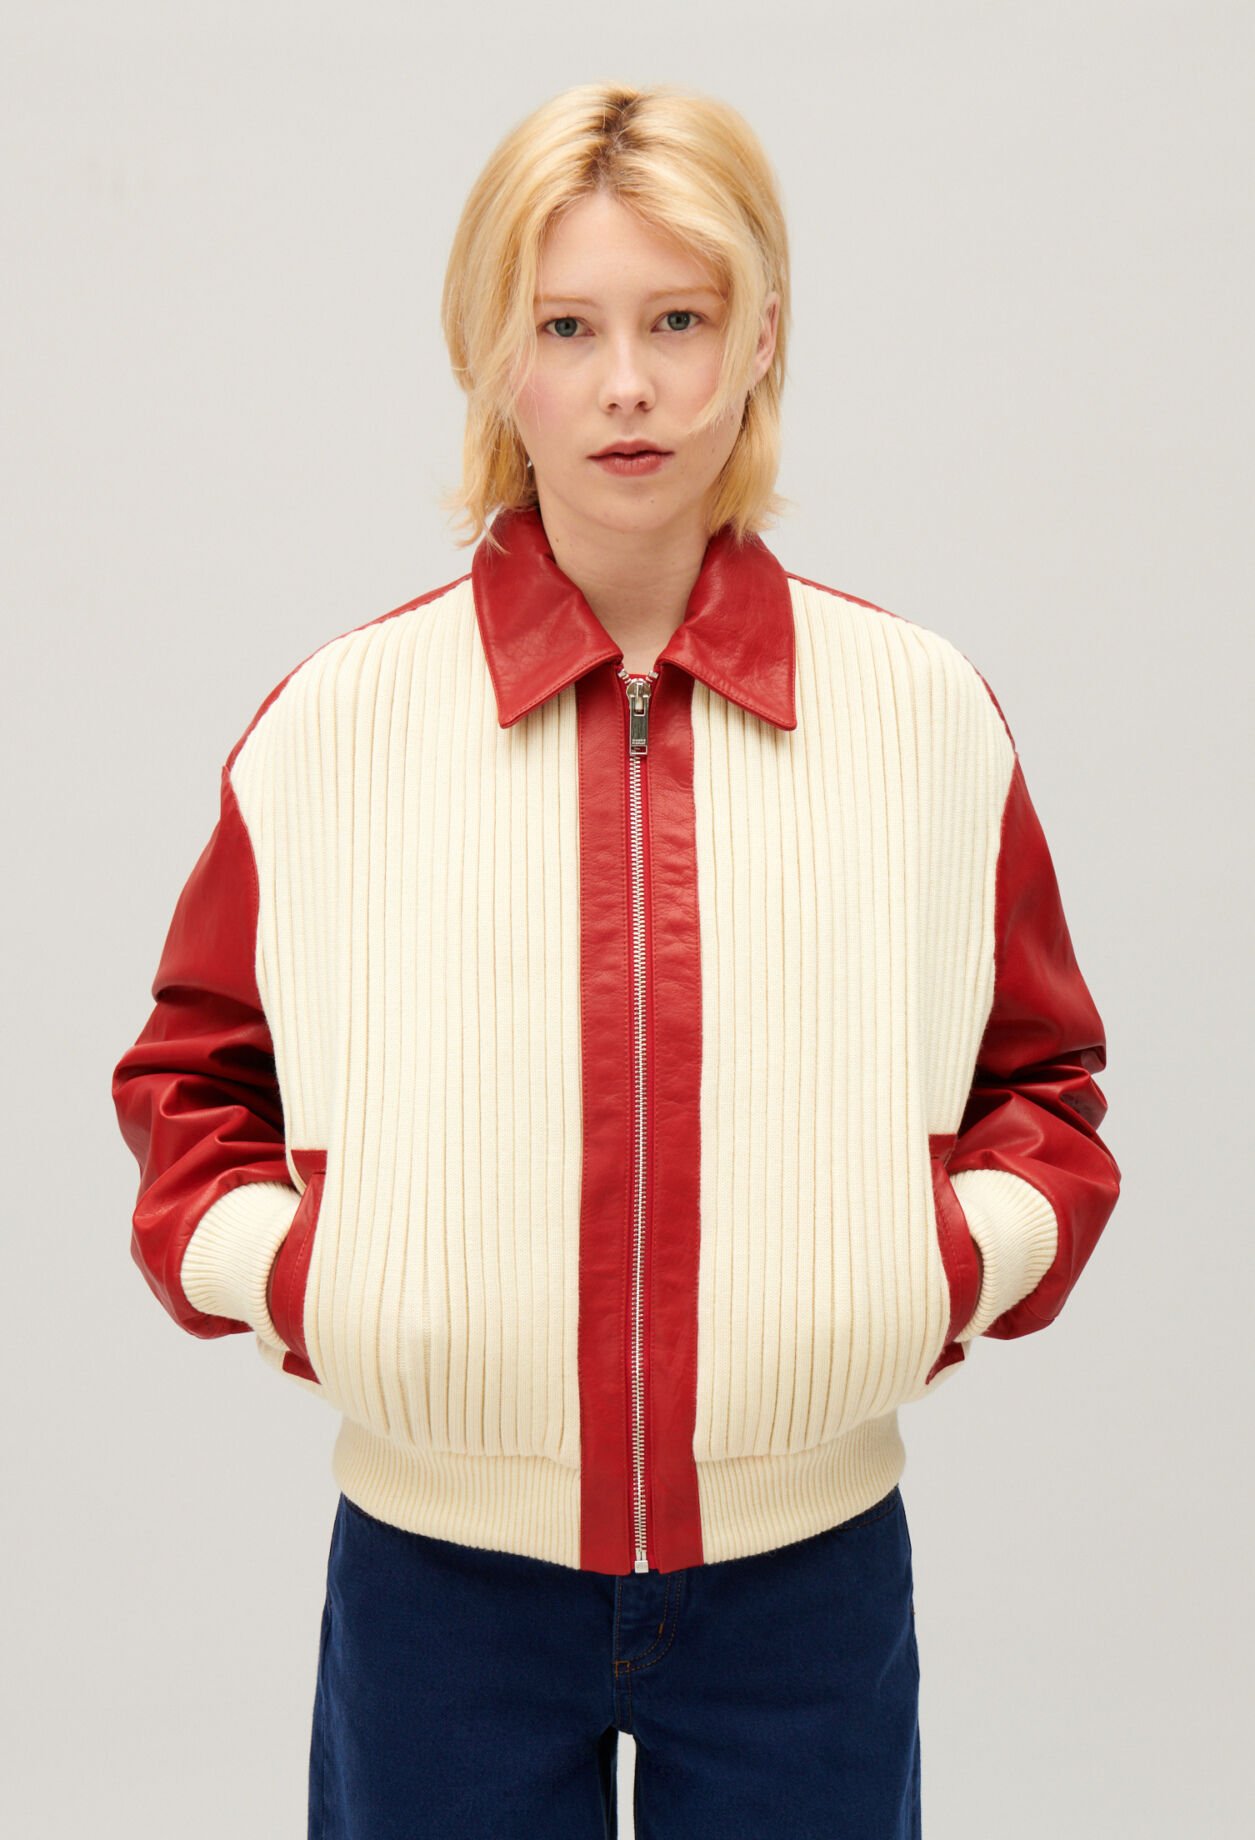 Two-tone dual-material jacket